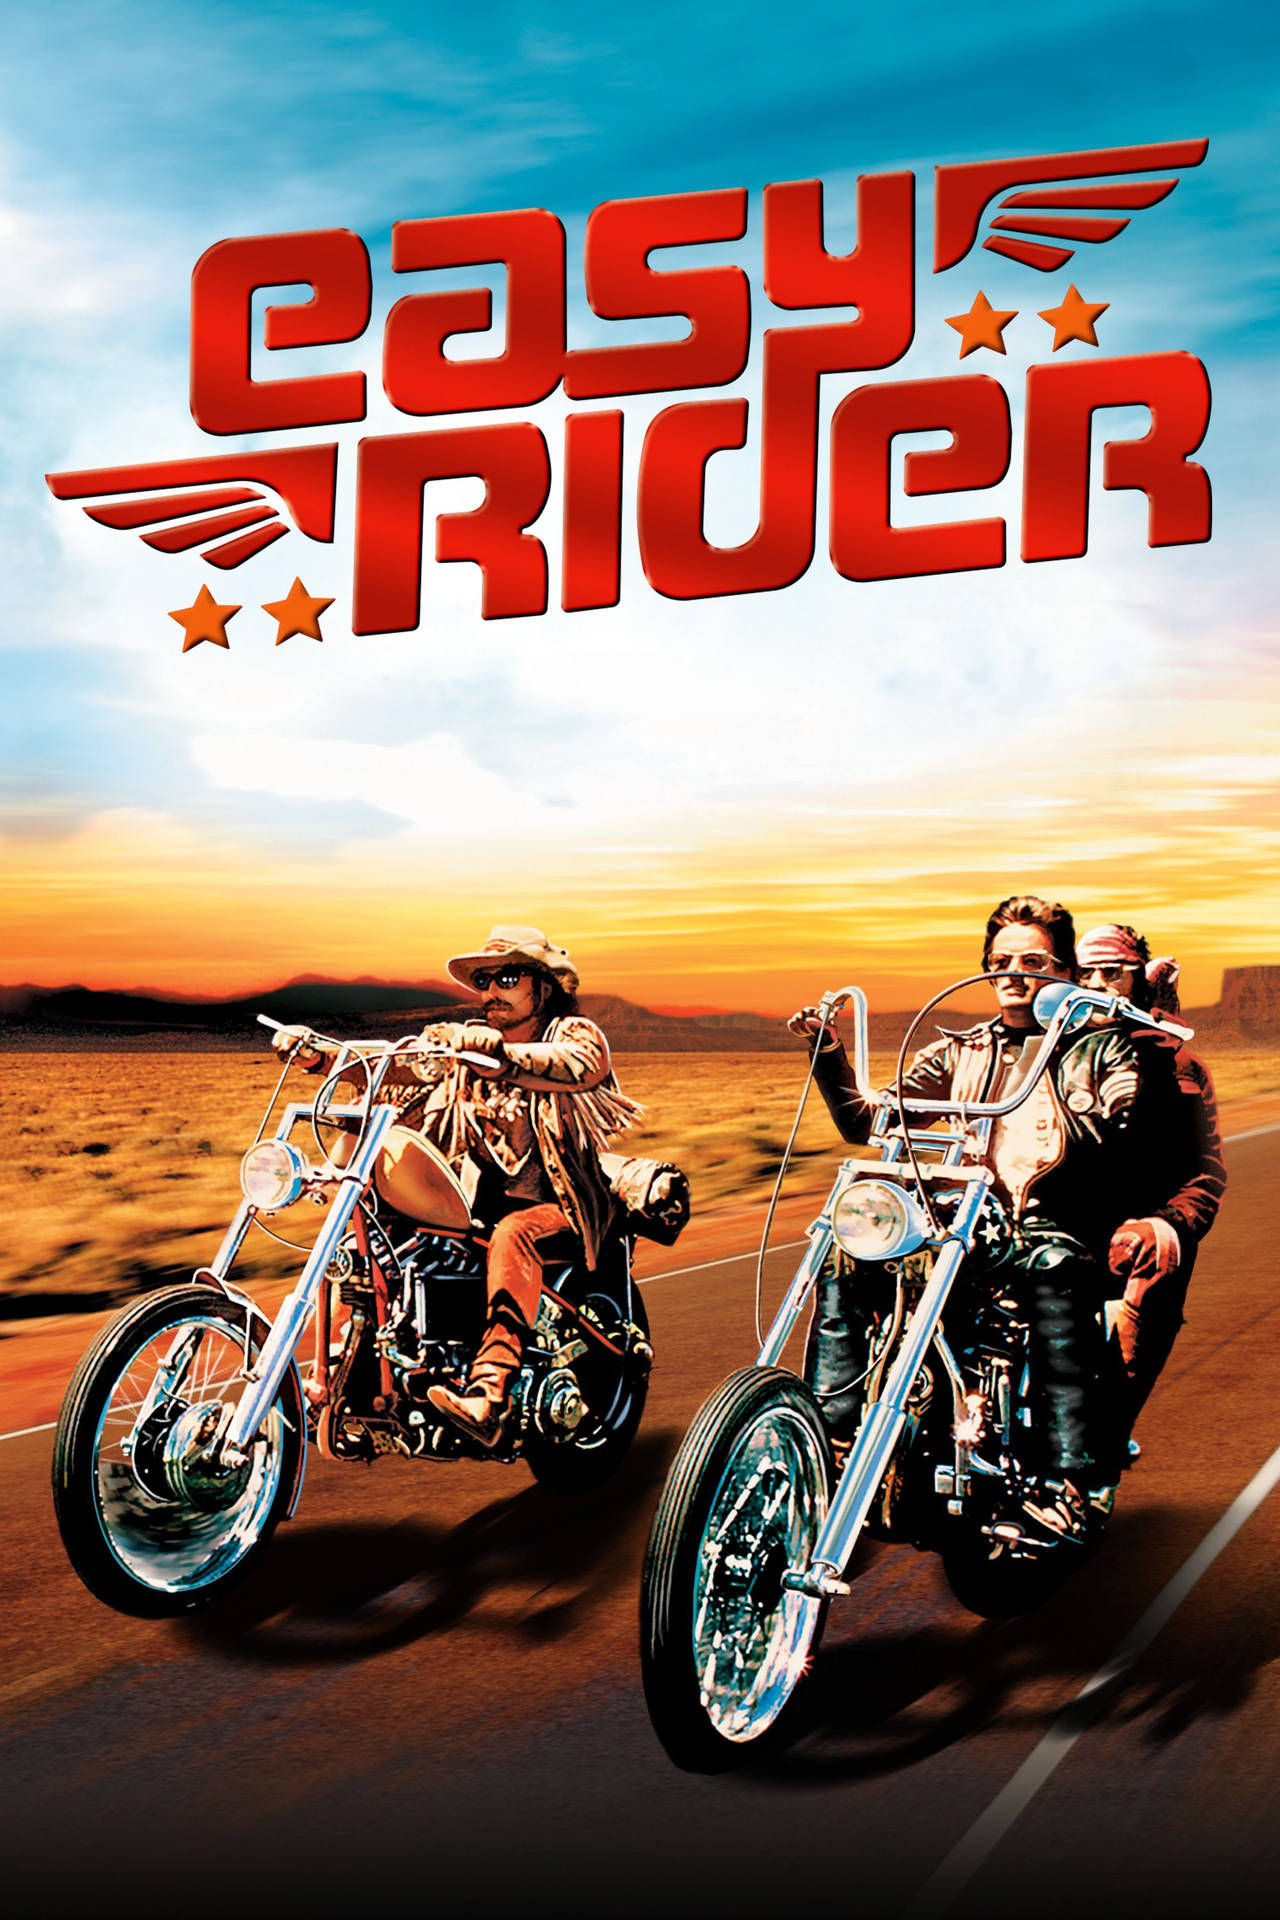 Caption: Iconic Easy Rider Movie Poster 1969 Background